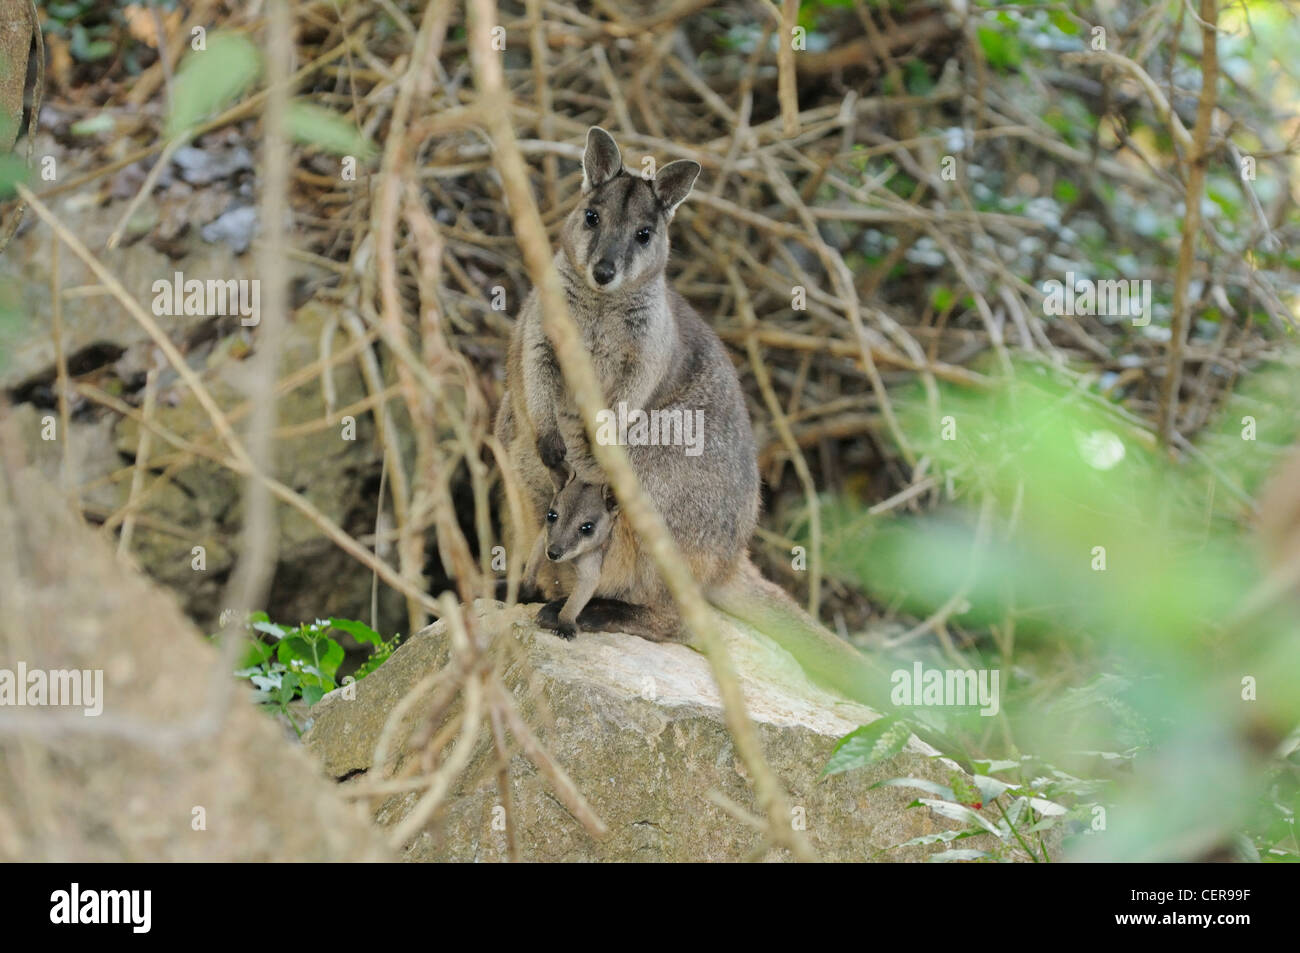 Unadorned Rock Wallaby Petrogale inornata Mother with joey in pouch Photographed in Queensland, Australia Stock Photo